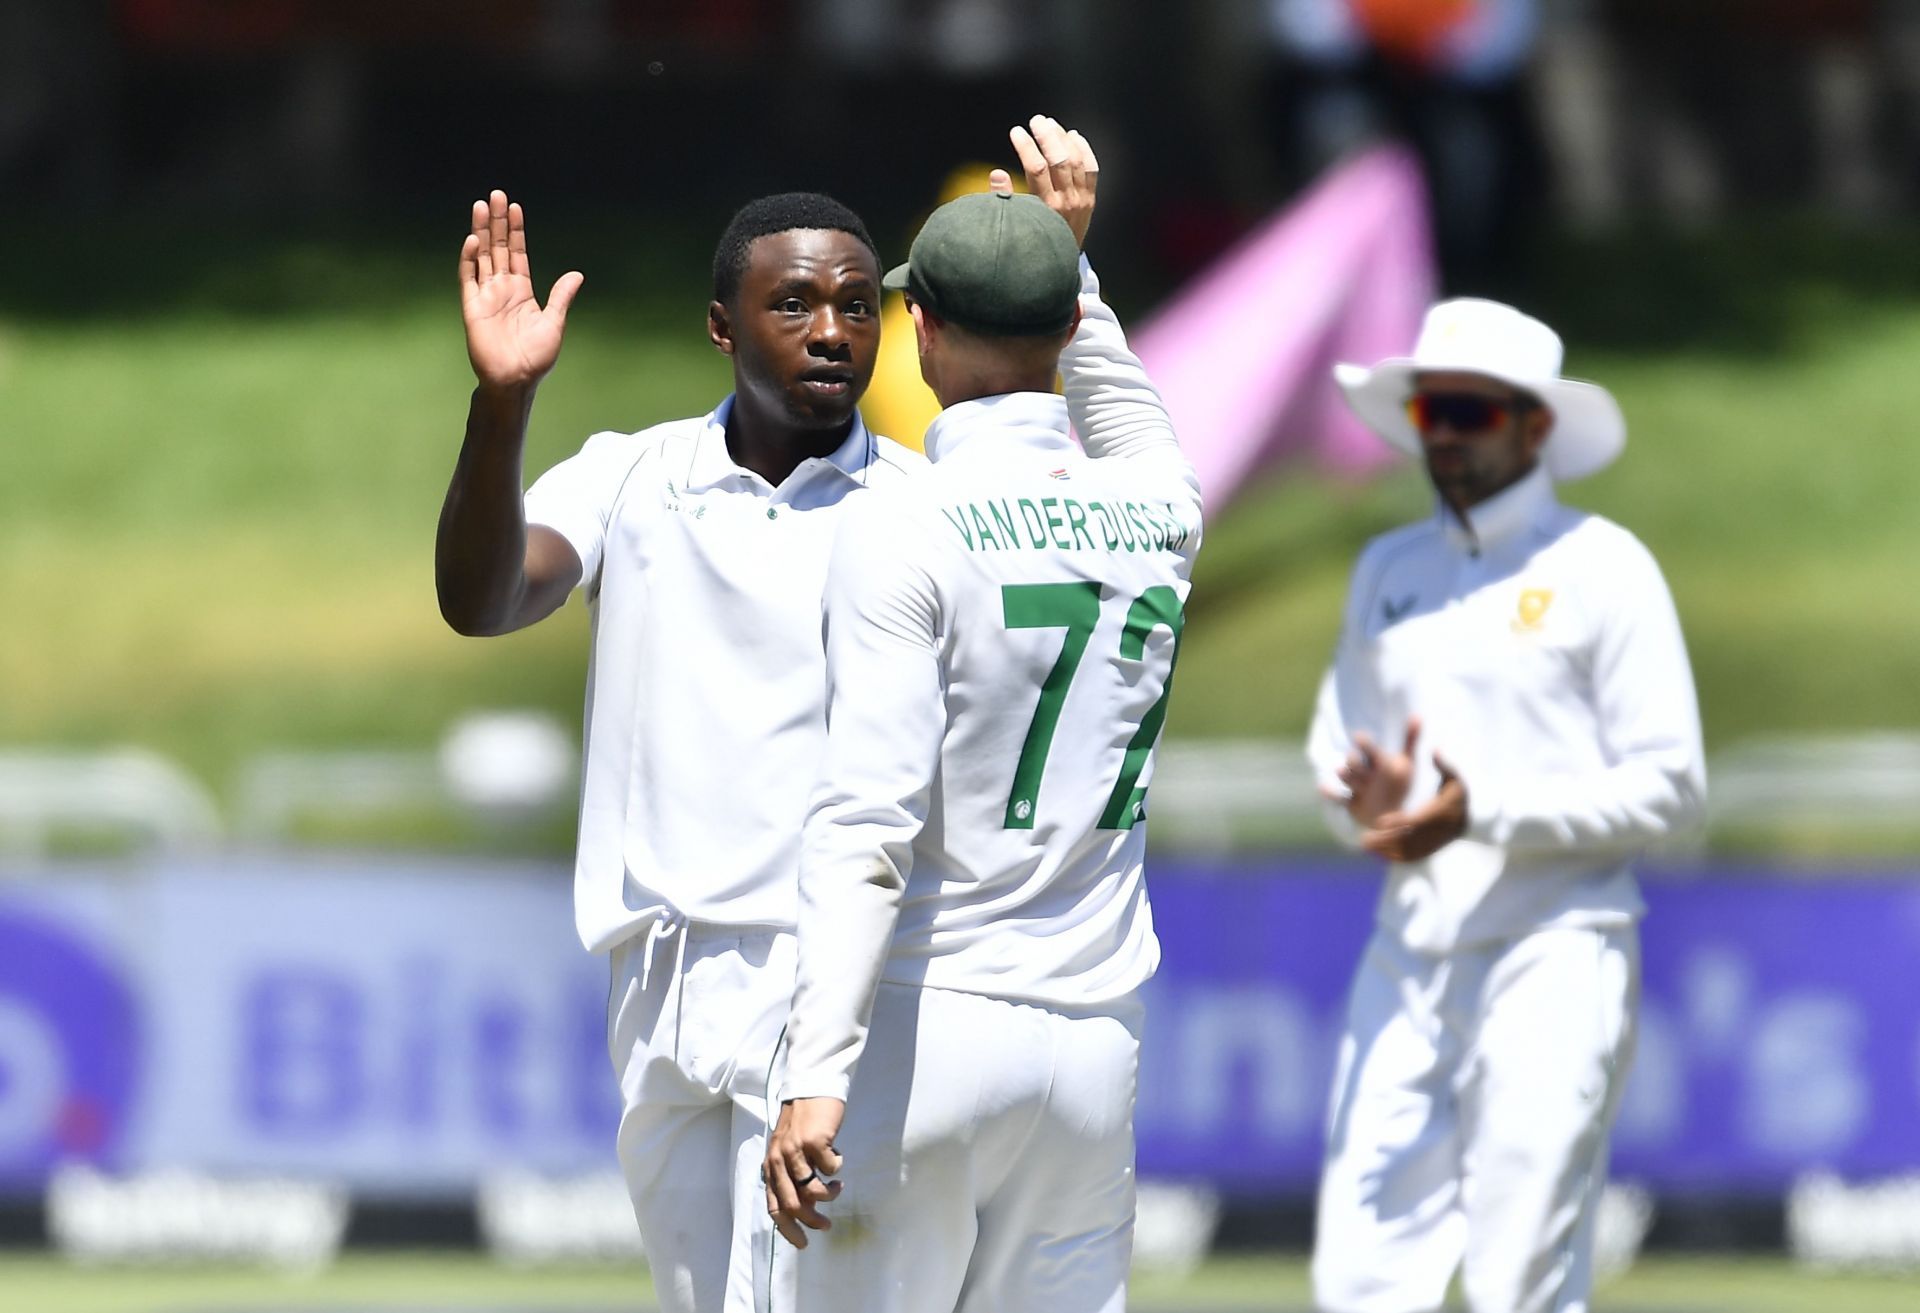 Kagiso Rabada celebrates a wicket during the Test series. Pic: Getty Images